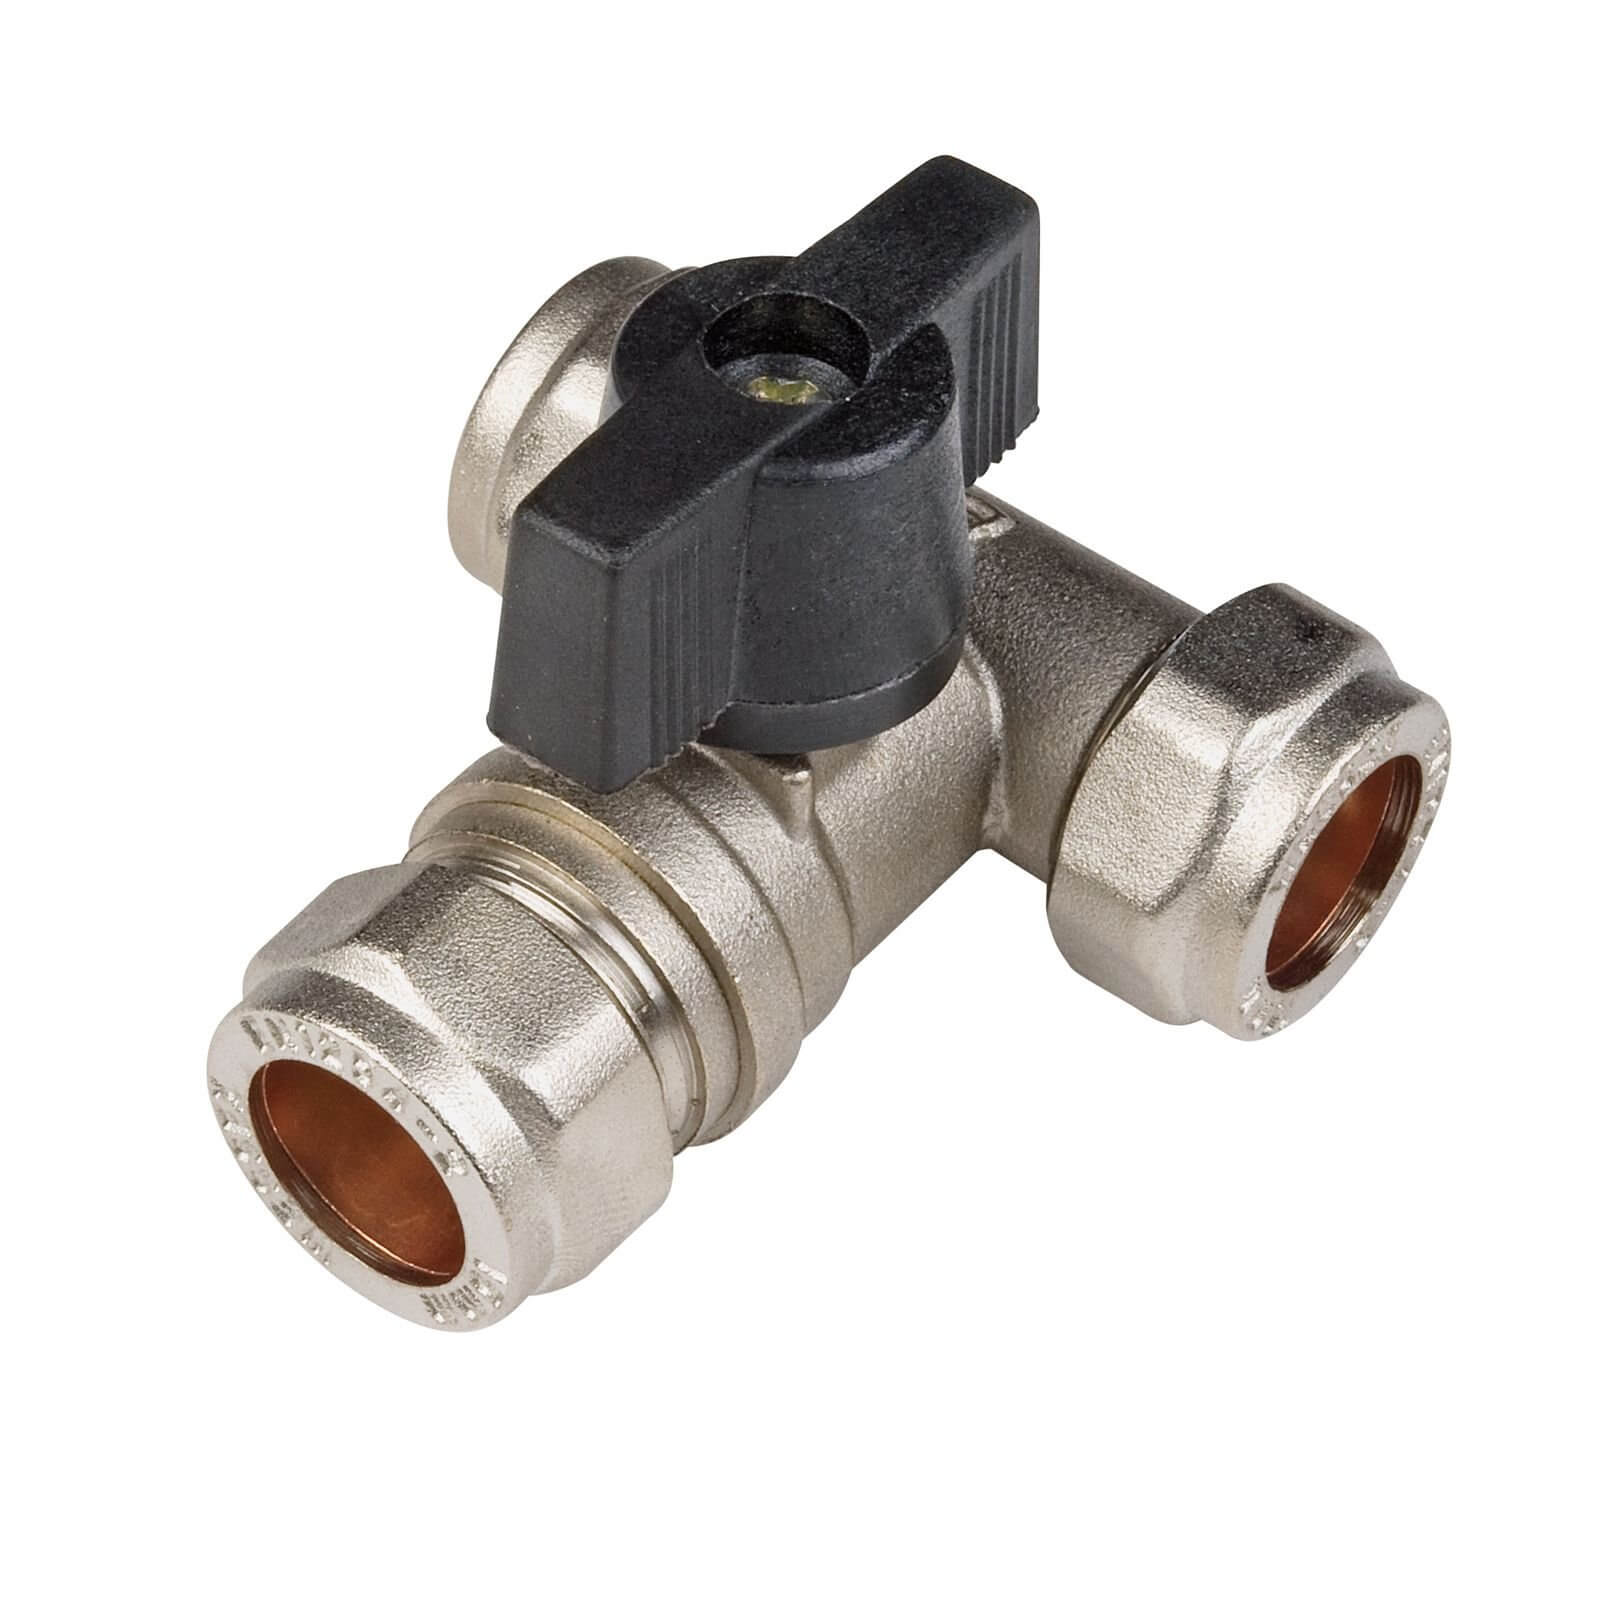 Isolation Tee Valve with On Off Handle Compression Fitting - 15mm